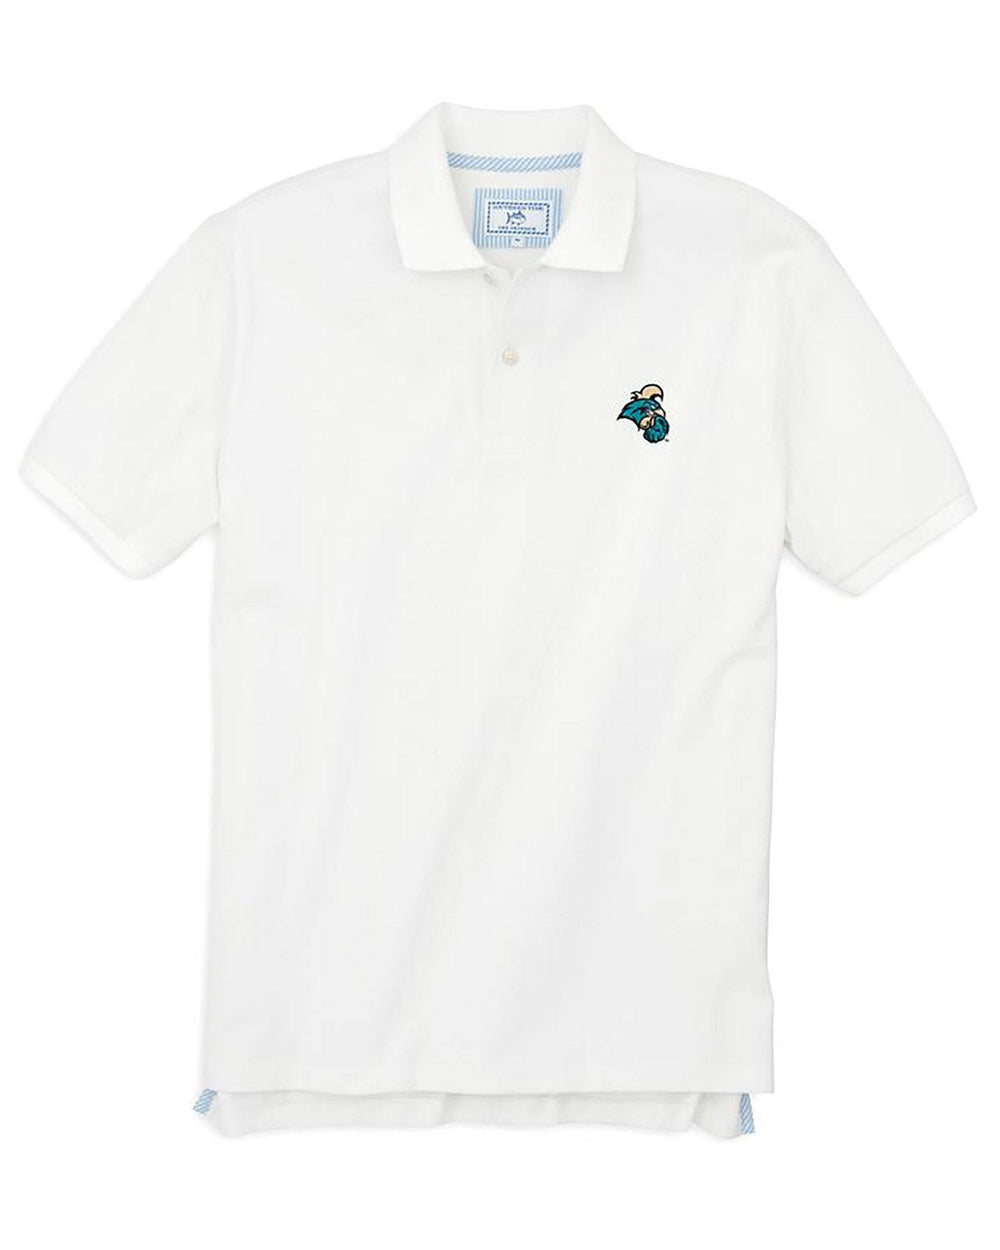 The front view of the Men's White Coastal Carolina Pique Polo Shirt by Southern Tide - Classic White